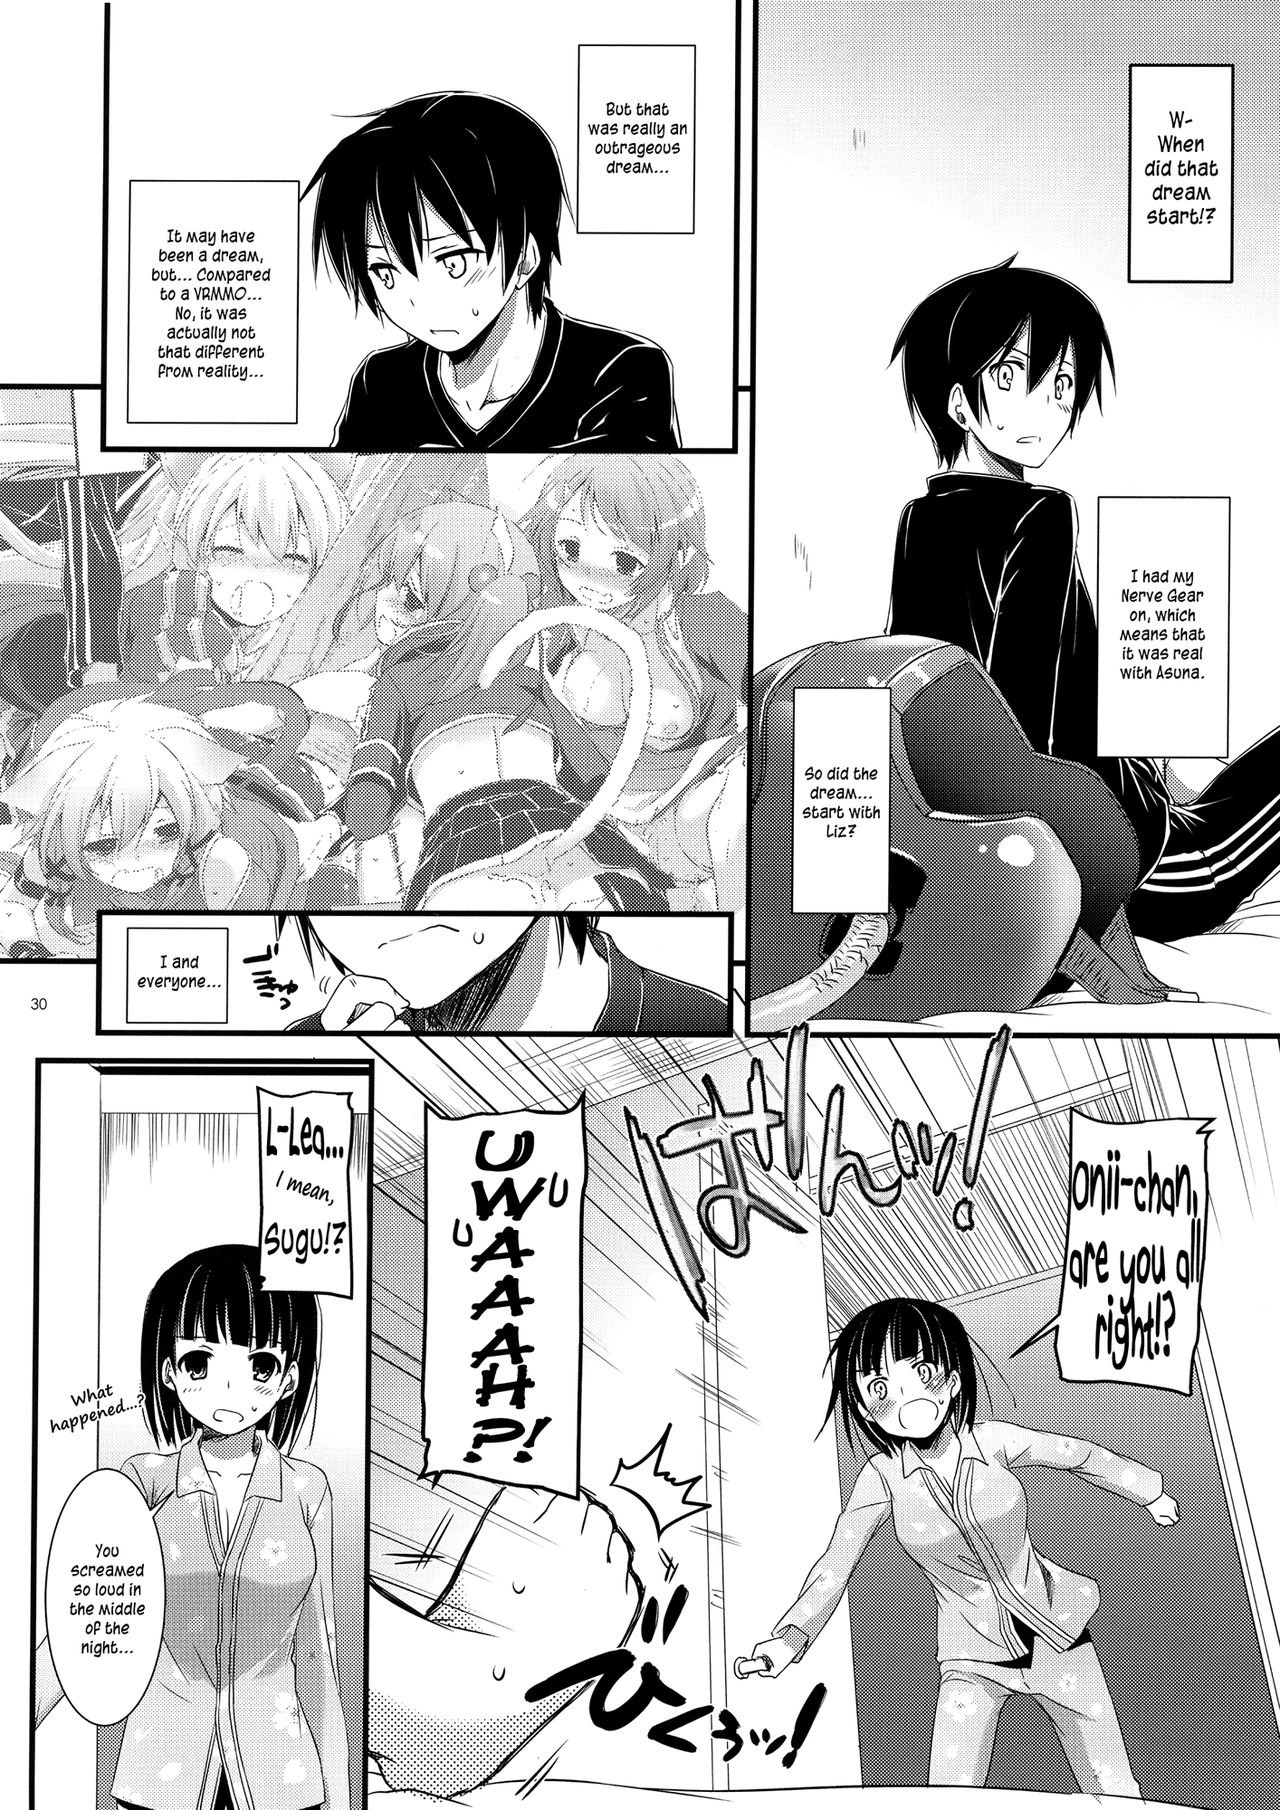 D.L. Action 72 hentai manga picture 29